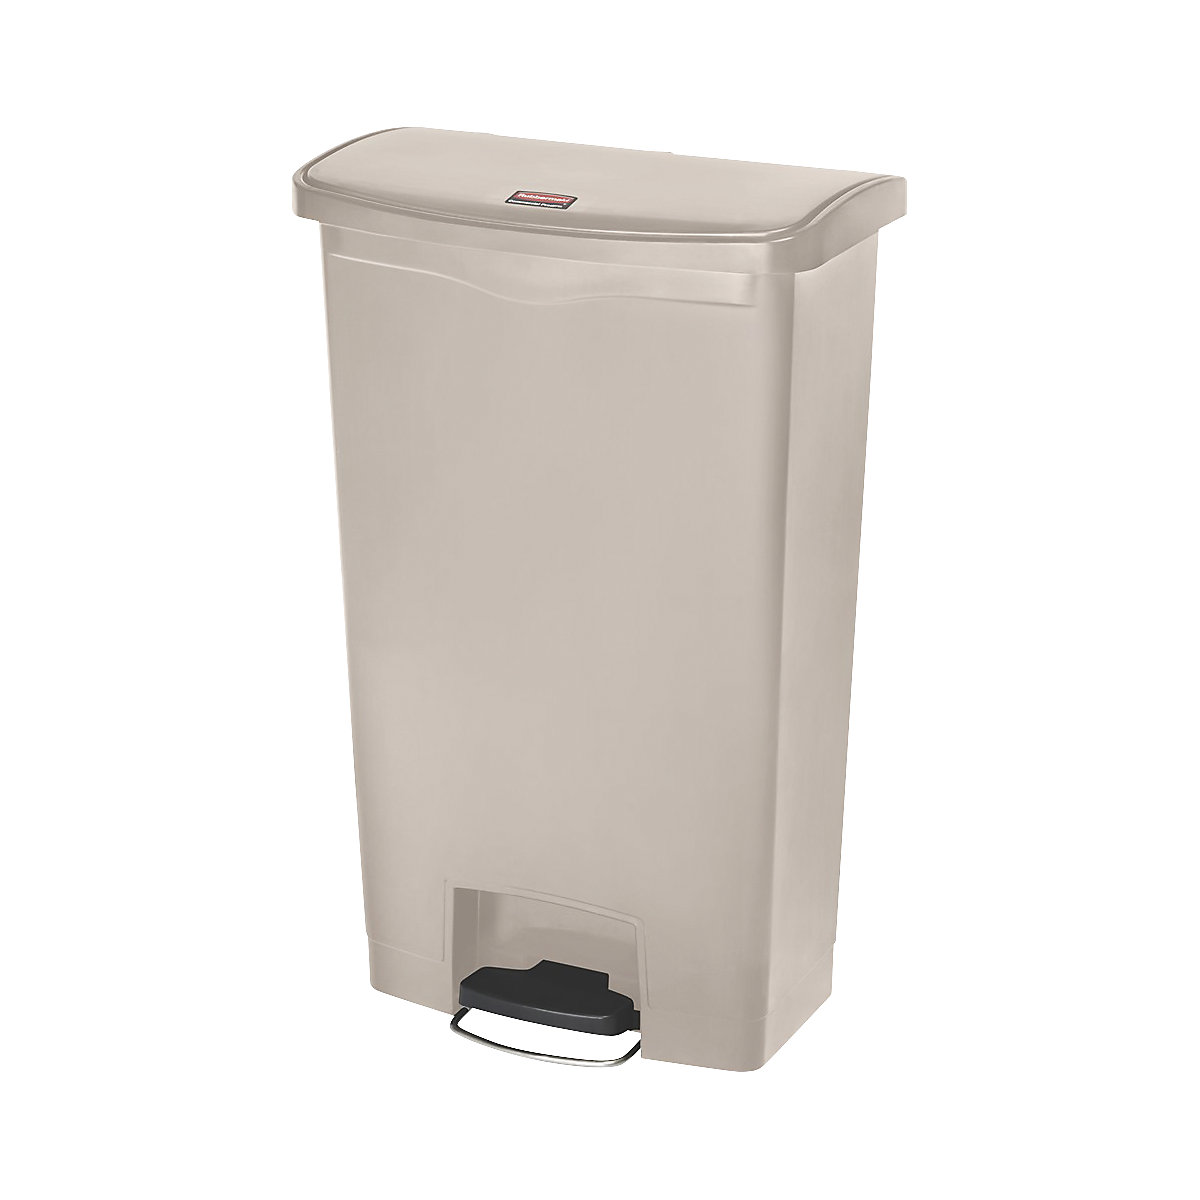 SLIM JIM® waste collector with pedal - Rubbermaid